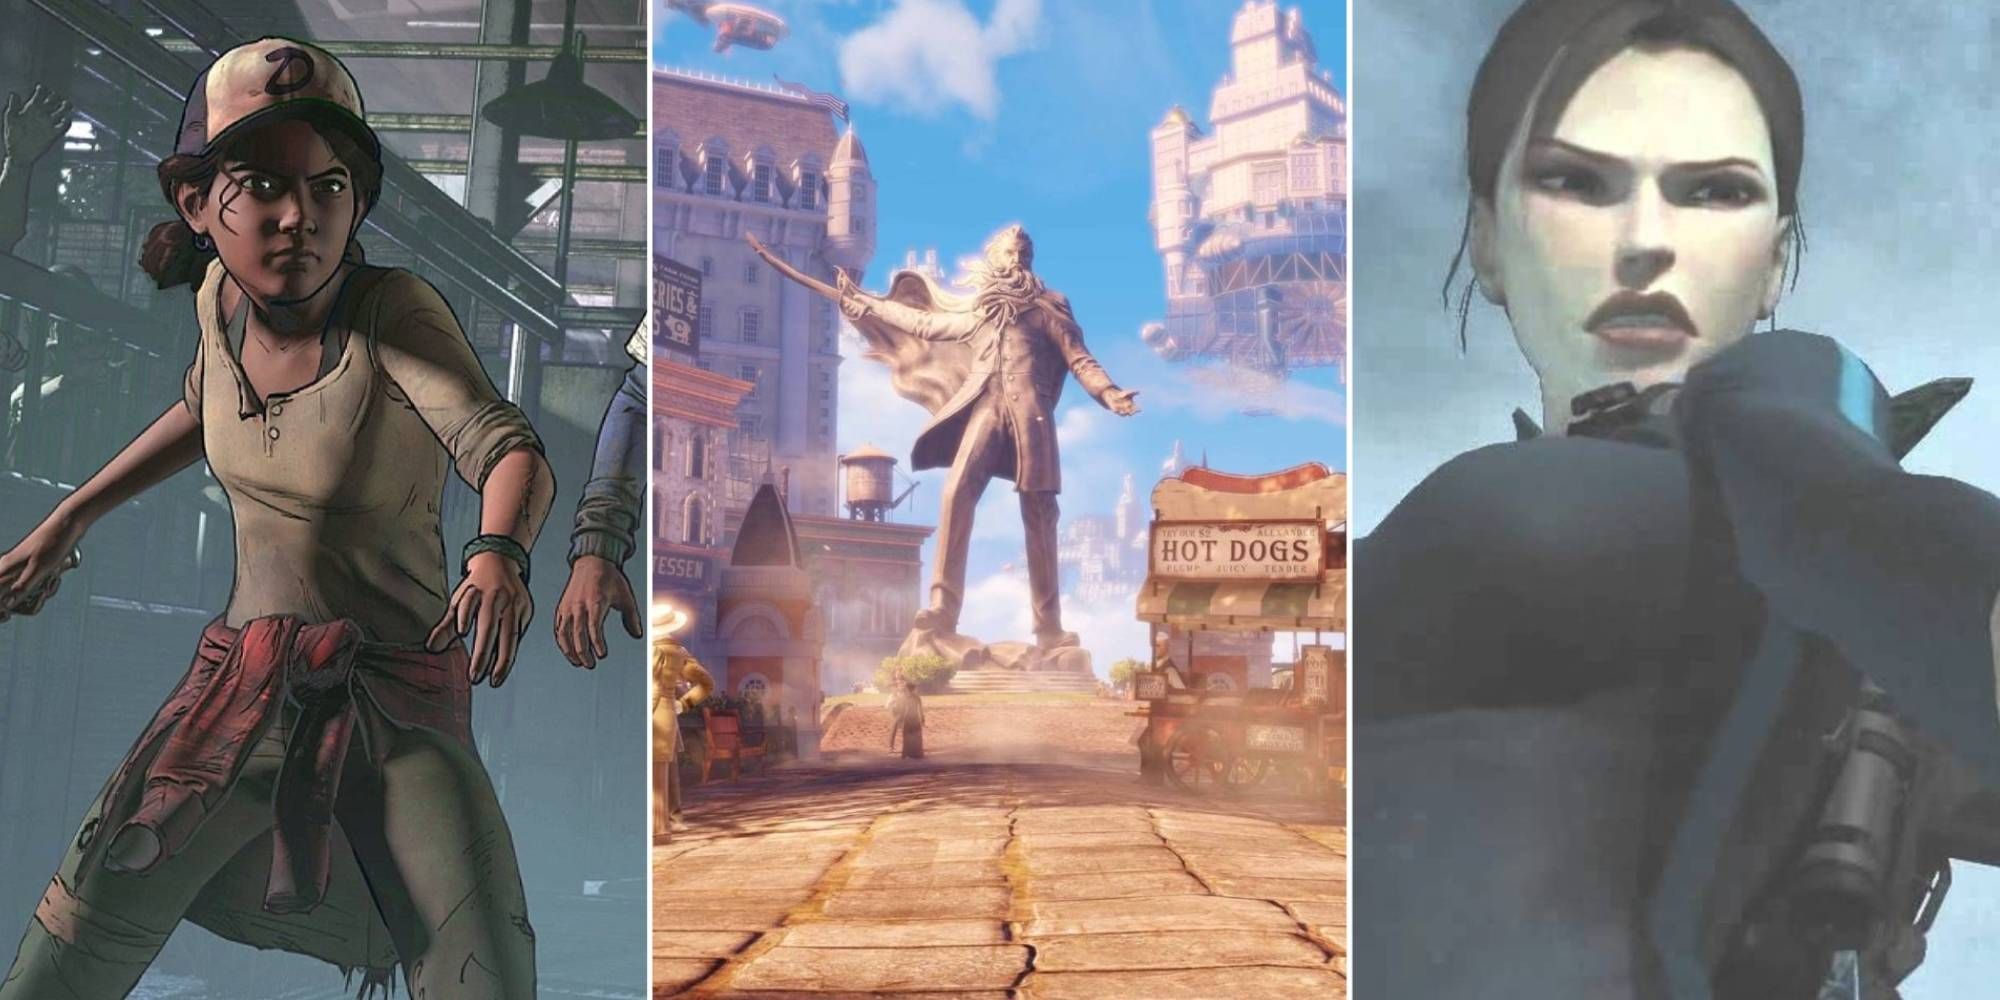 A collage of images featuring Clementine, Columbia from BioShock Infinite and Lara Croft